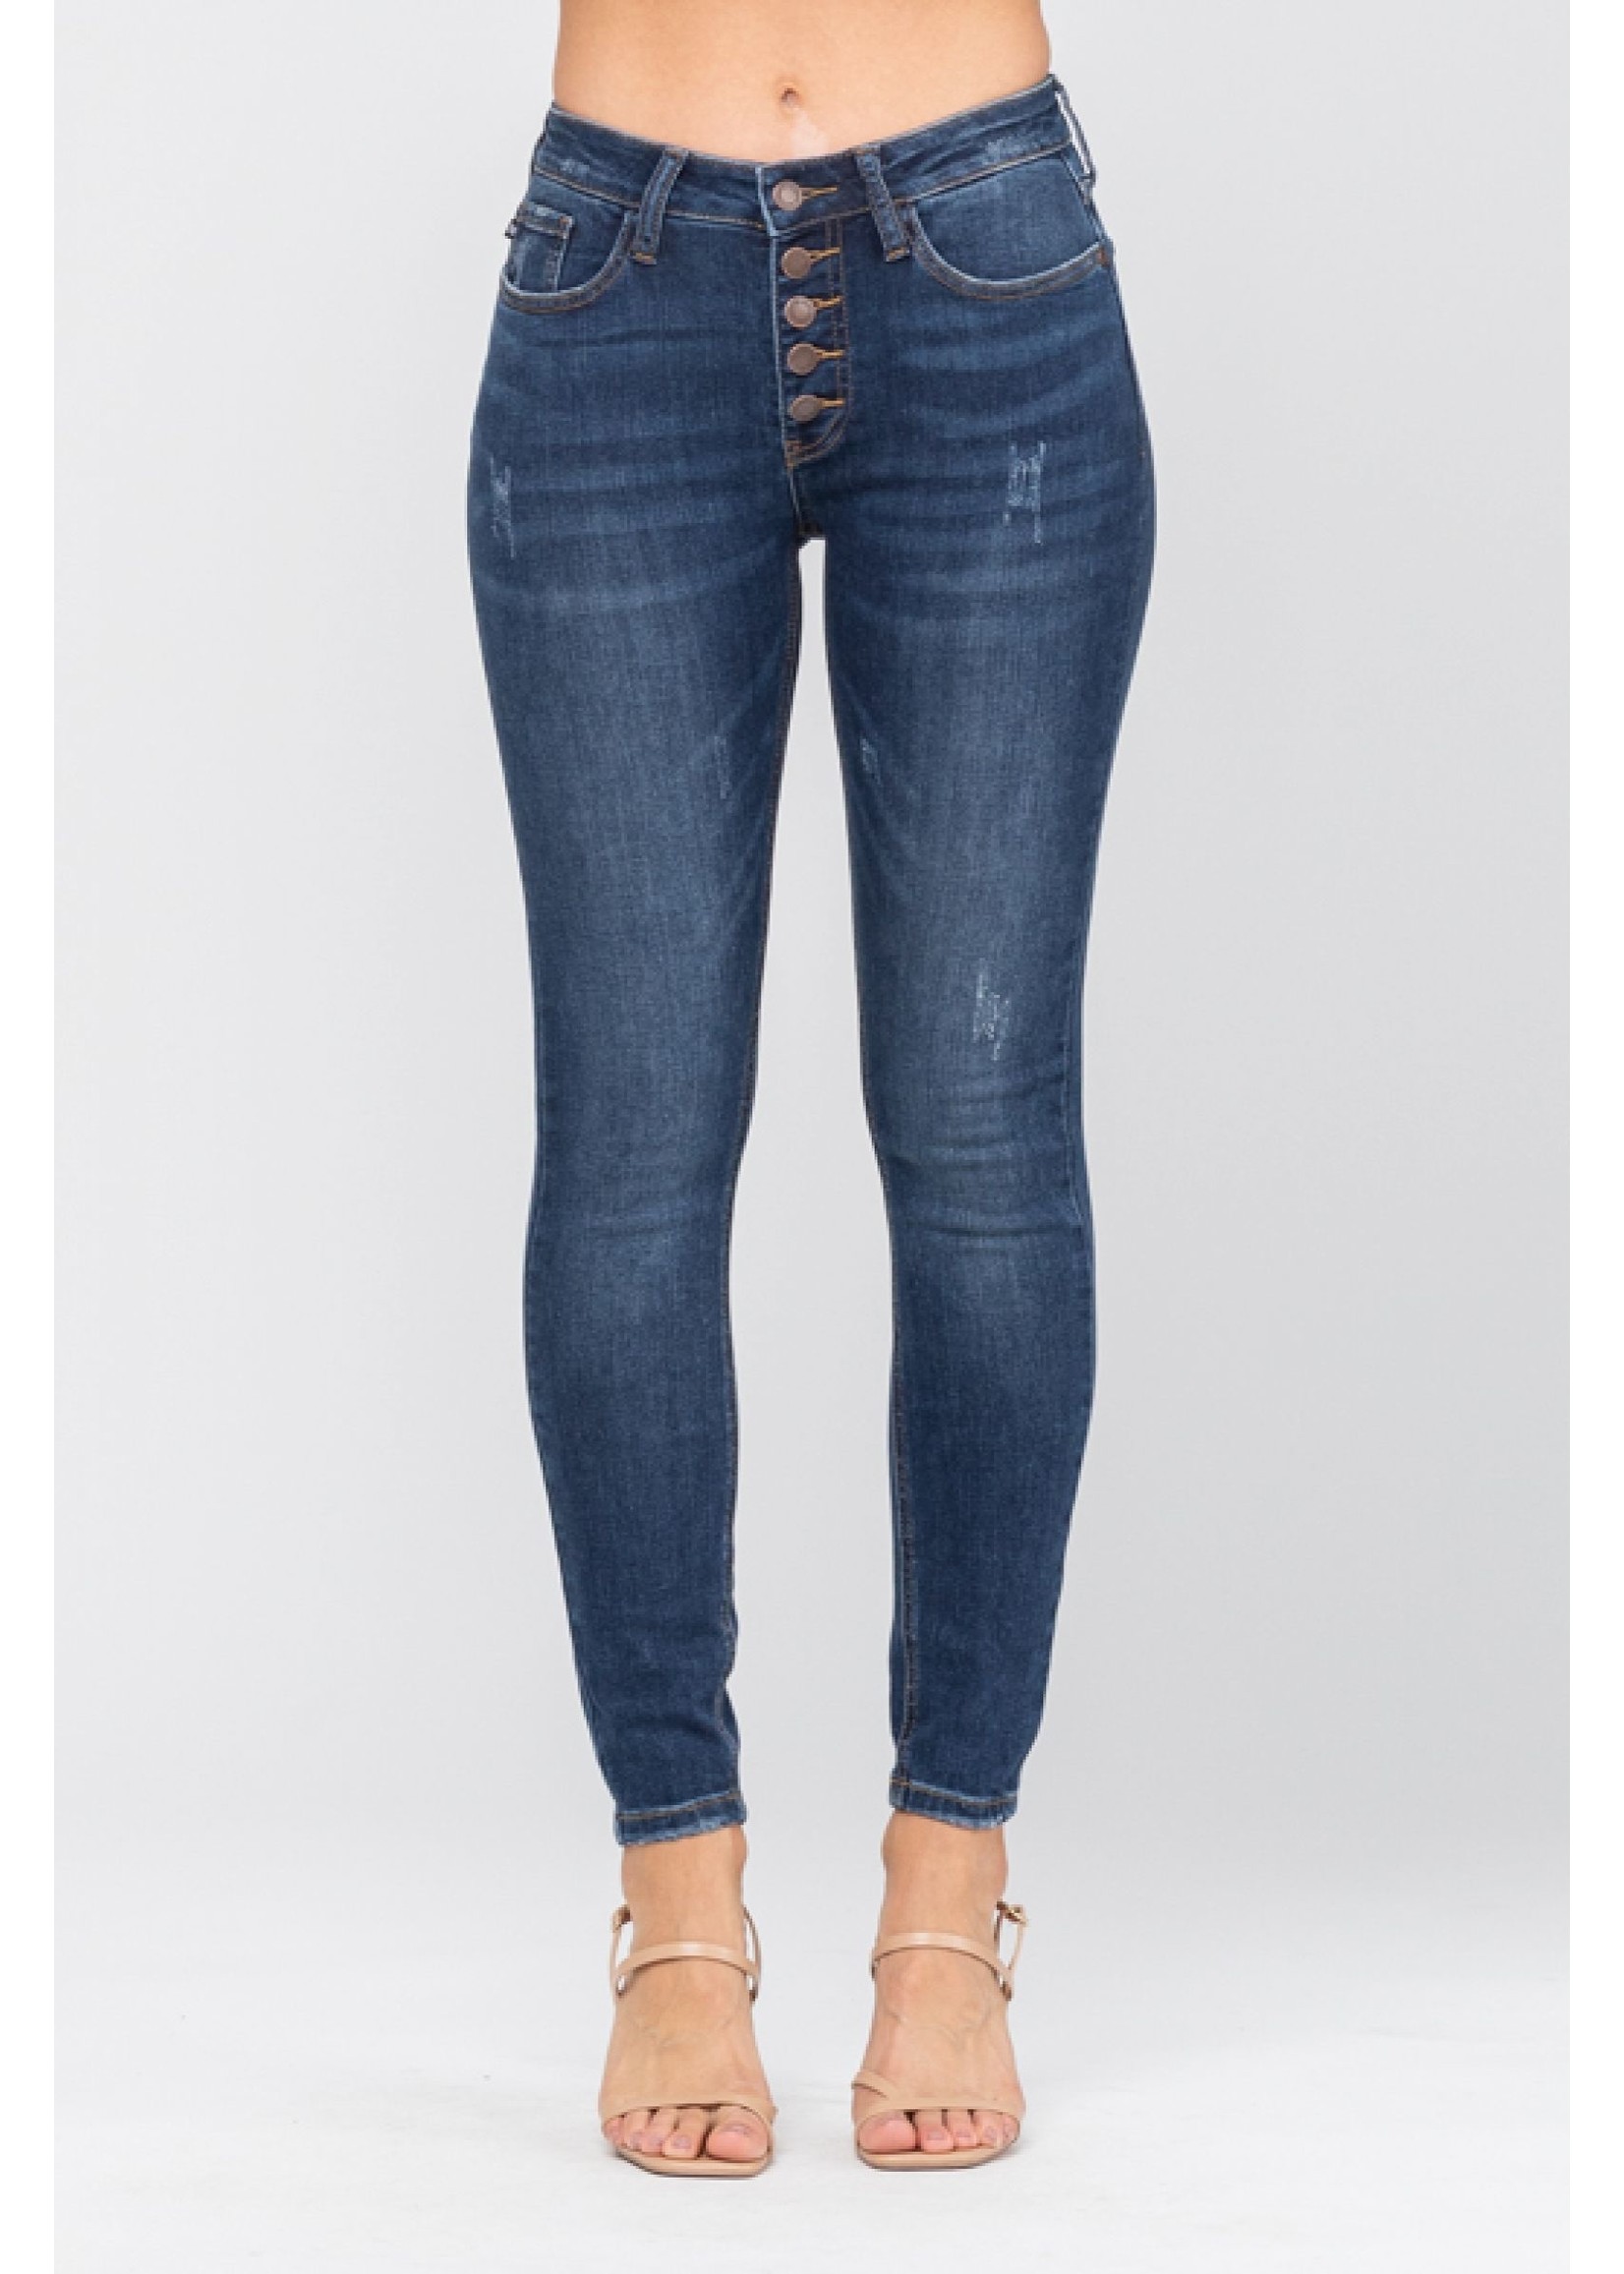 BUTTON FLY SKINNY JEANS